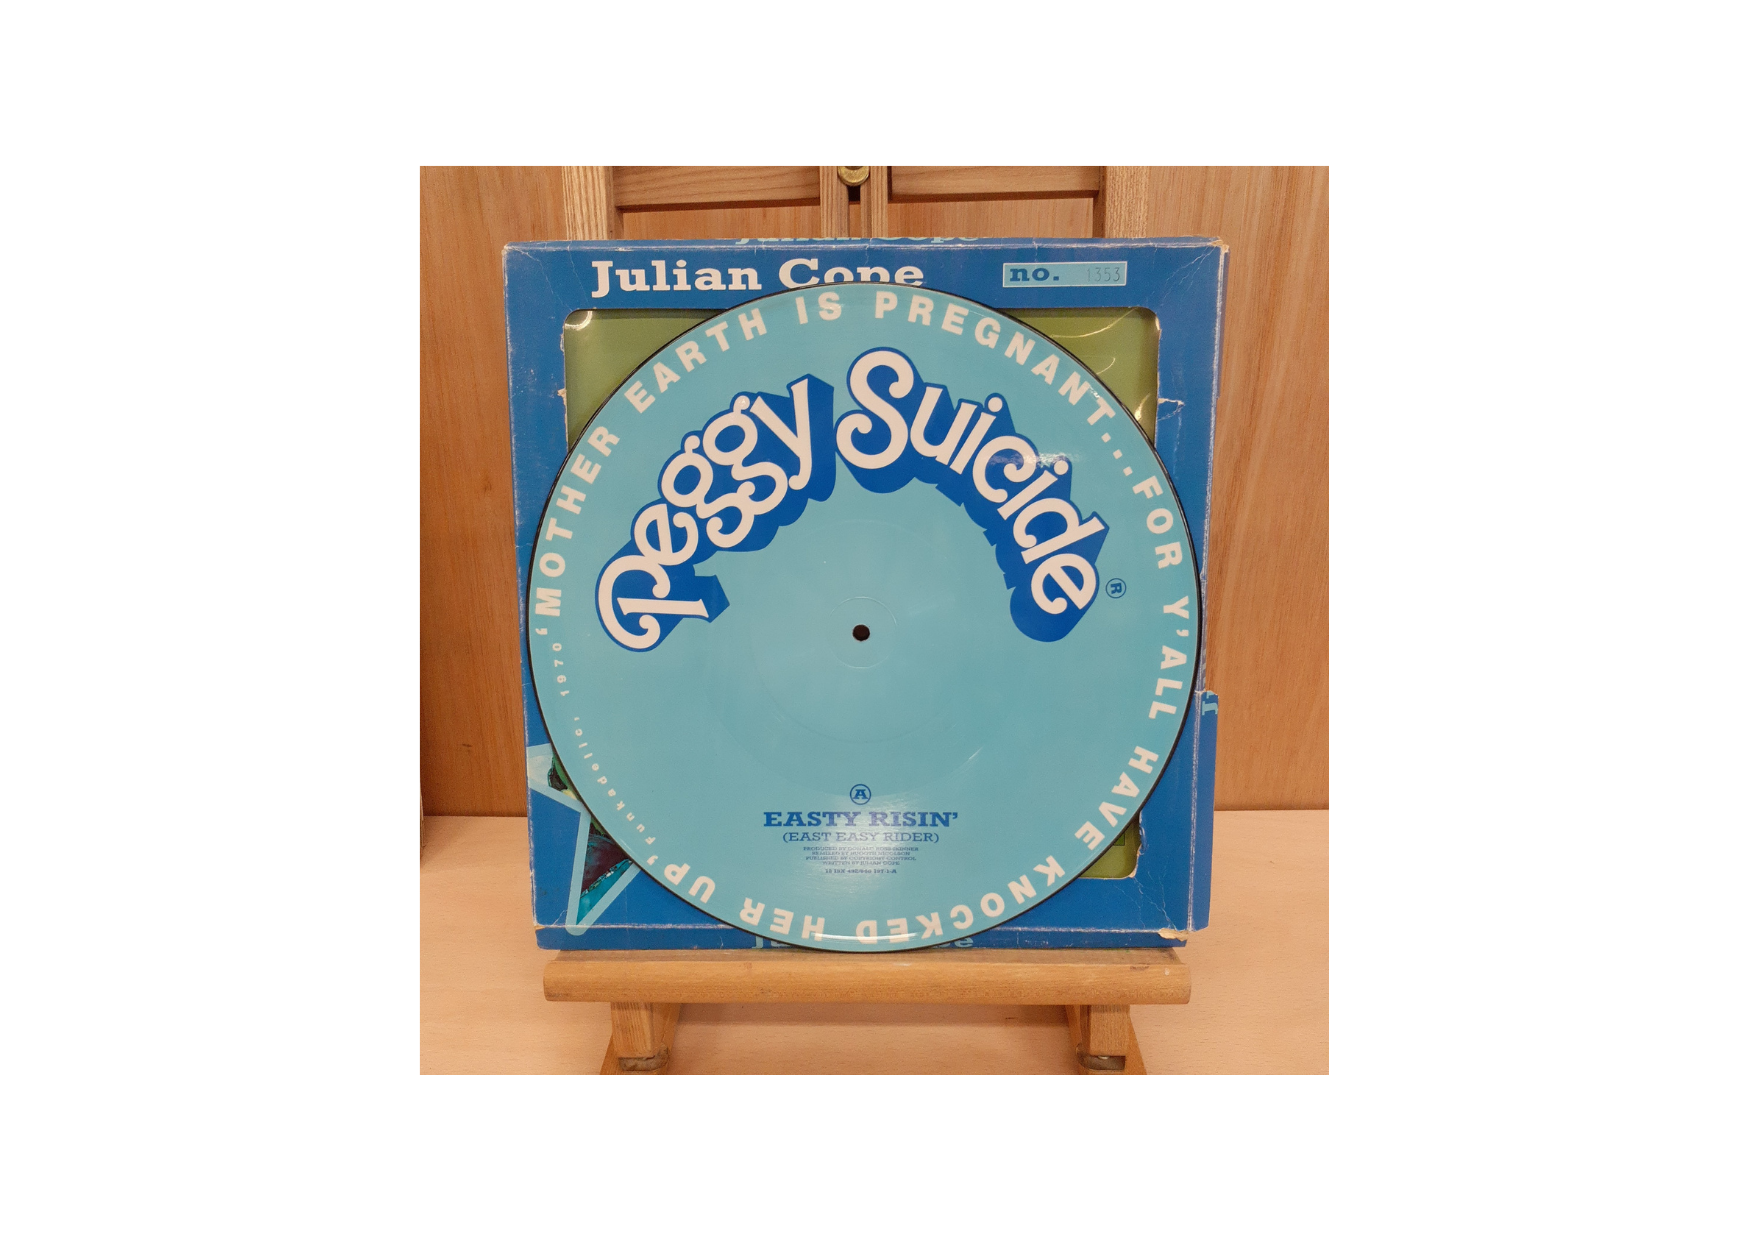 Julian Cope - Easty Risin' (East Easy Rider) 12" Boxed Record Side One View